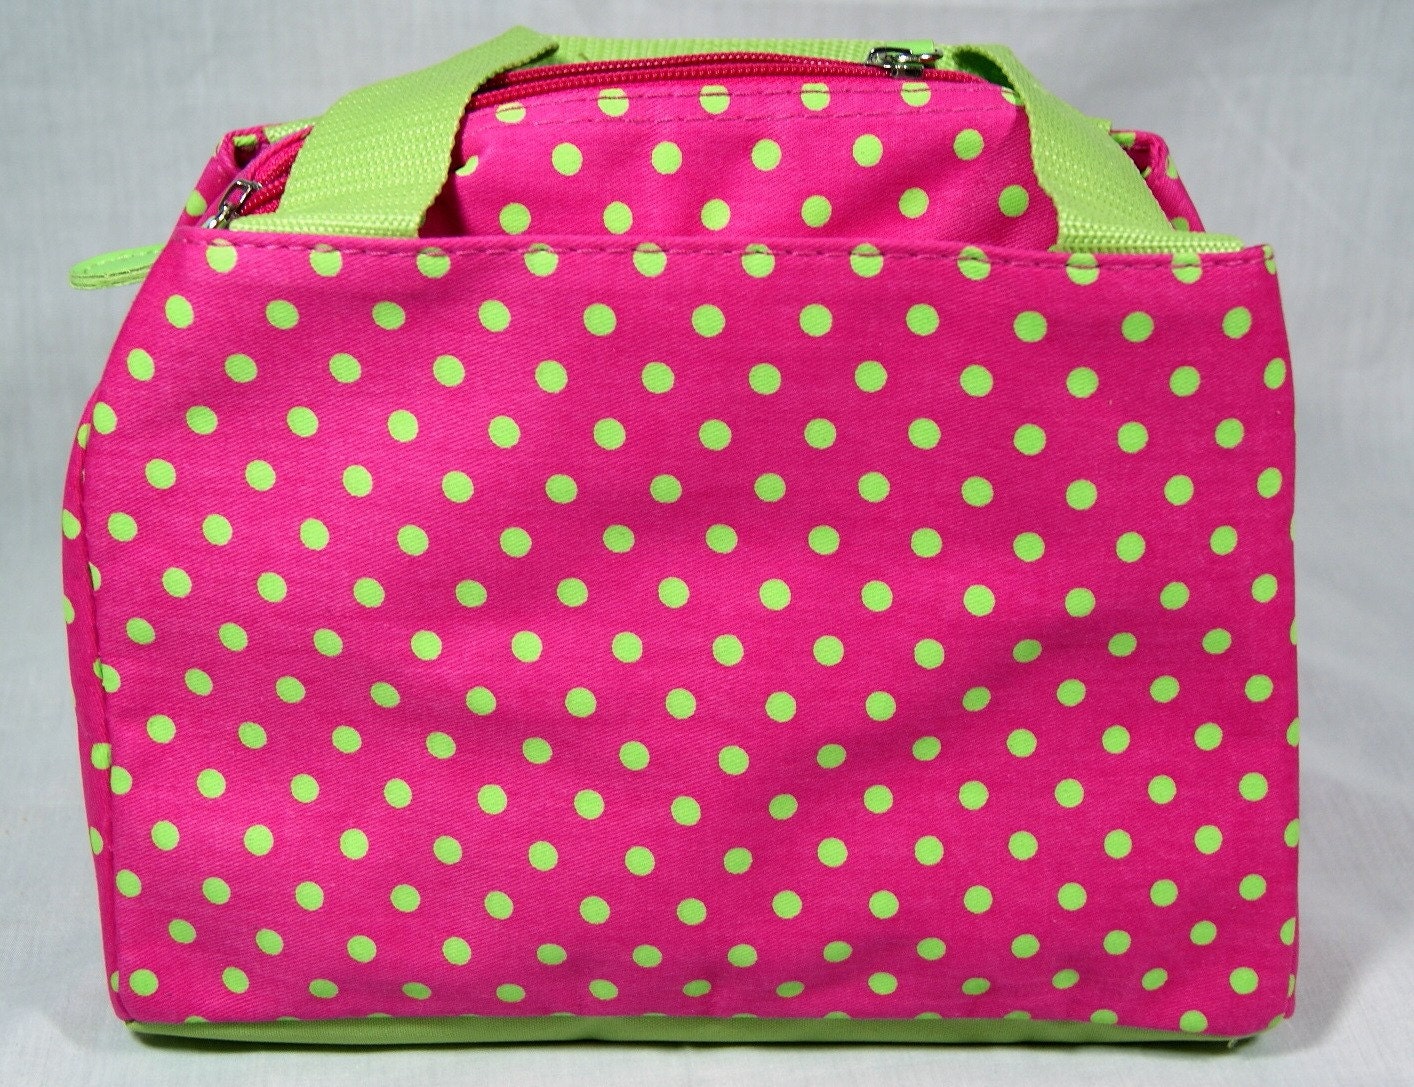 Personalized insulated lunch tote - Pink with small lime green polka dot